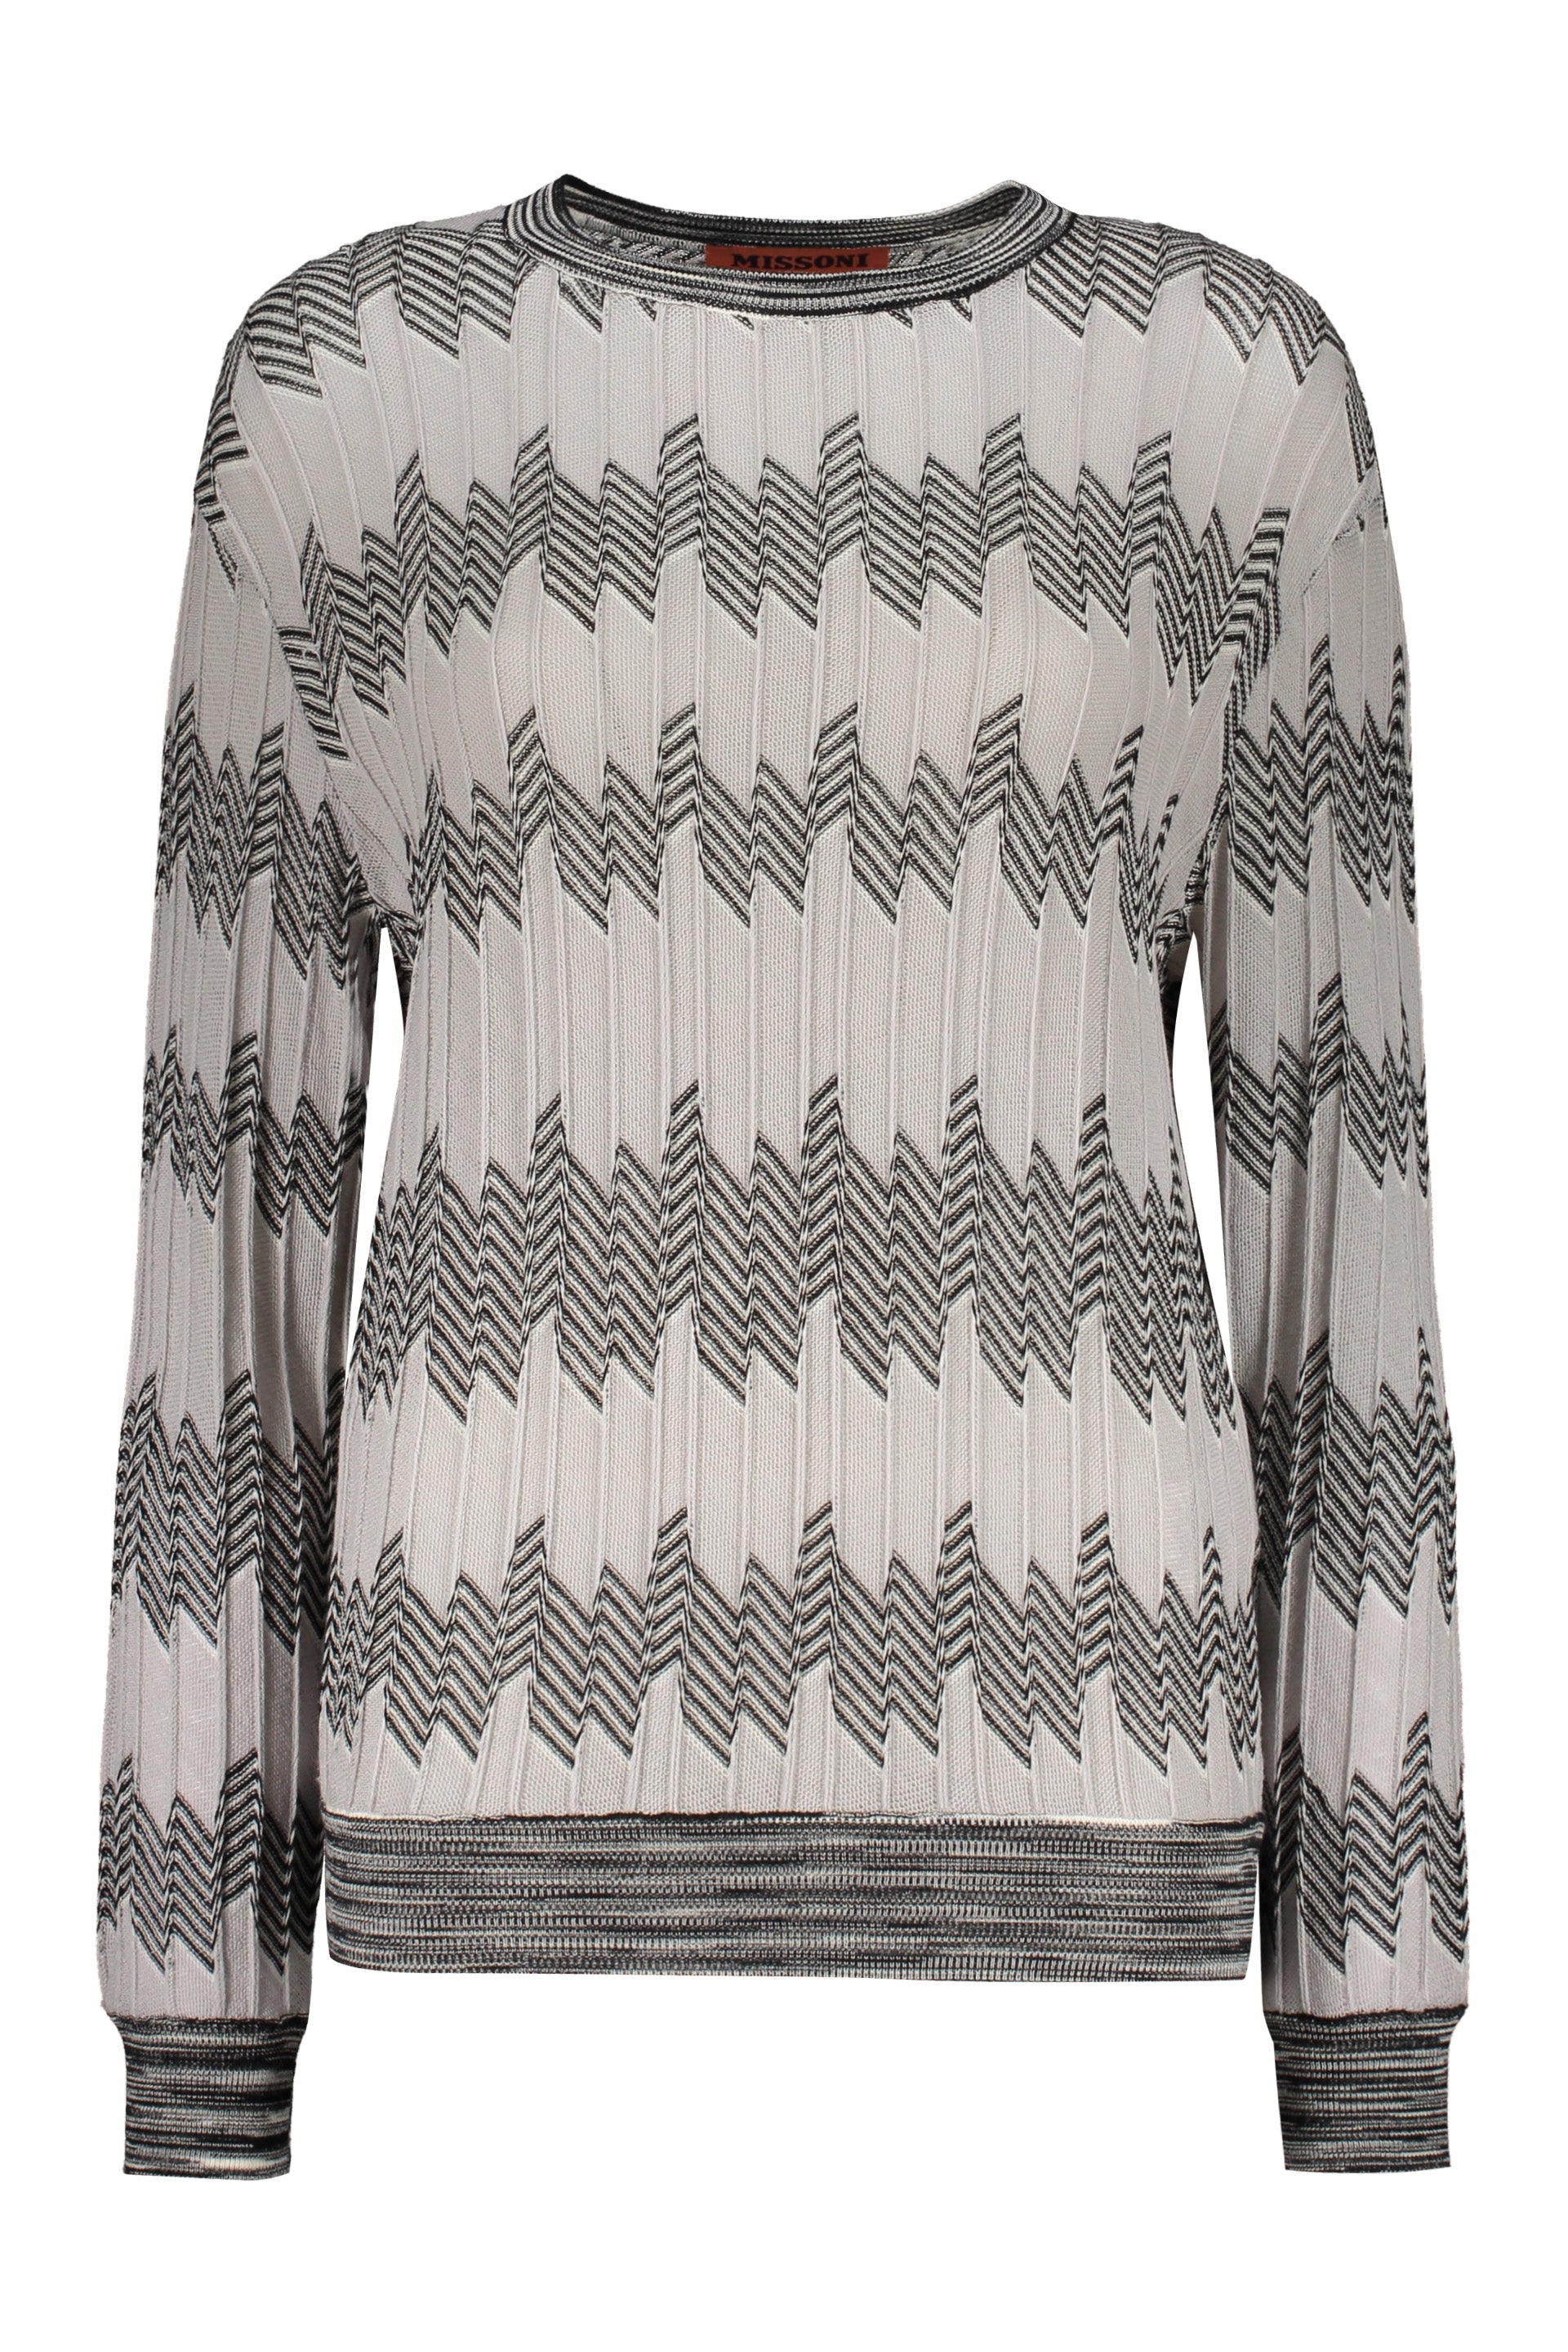 Missoni-OUTLET-SALE-Crew-neck-wool-sweater-Strick-40-ARCHIVE-COLLECTION.jpg